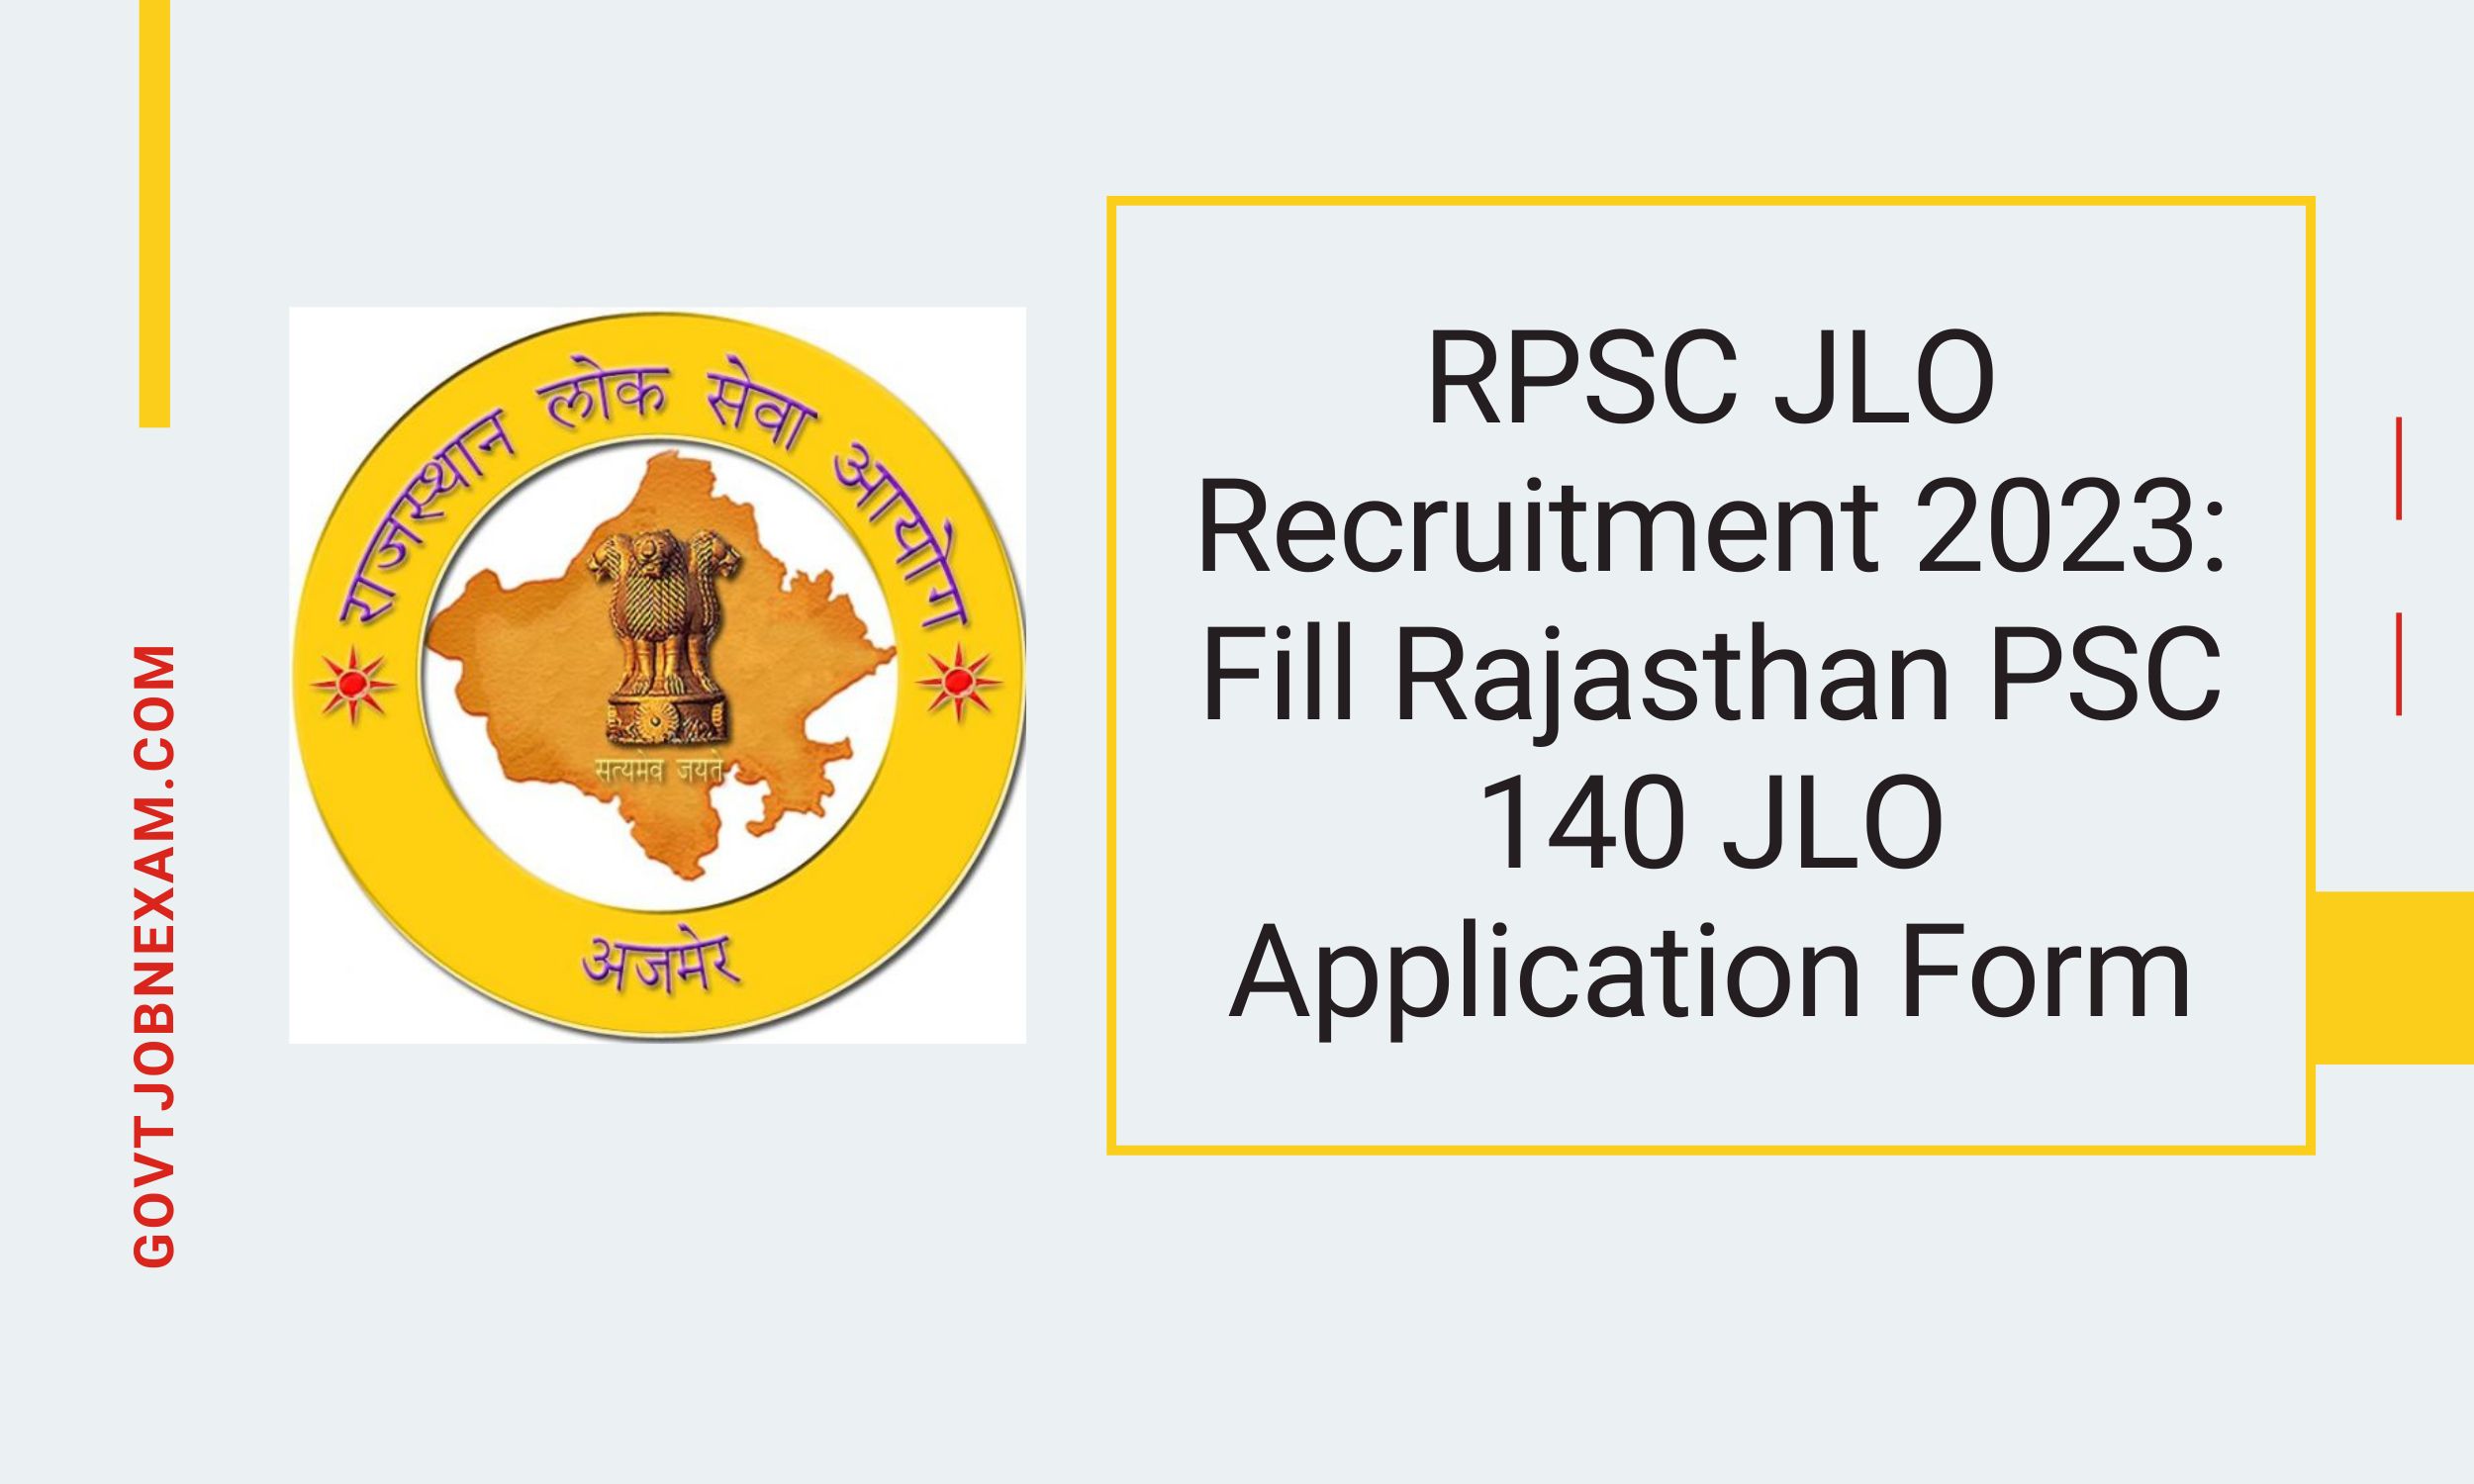 You are currently viewing RPSC JLO Recruitment 2023: Fill Rajasthan PSC 140 JLO Application Form